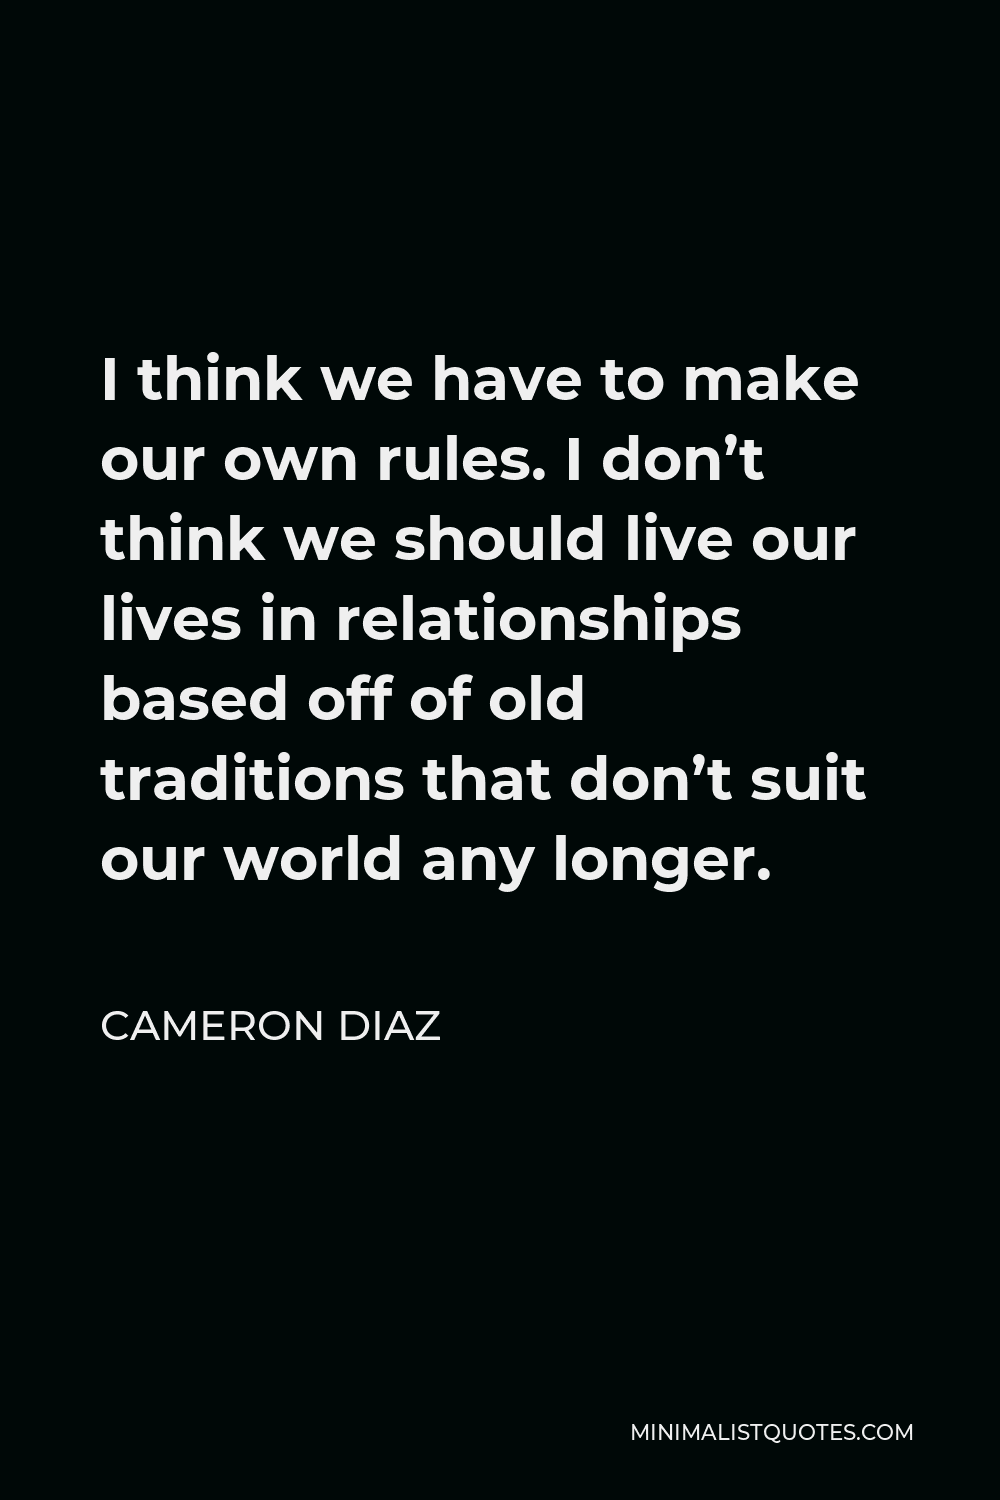 Cameron Diaz Quote - I think we have to make our own rules. I don’t think we should live our lives in relationships based off of old traditions that don’t suit our world any longer.